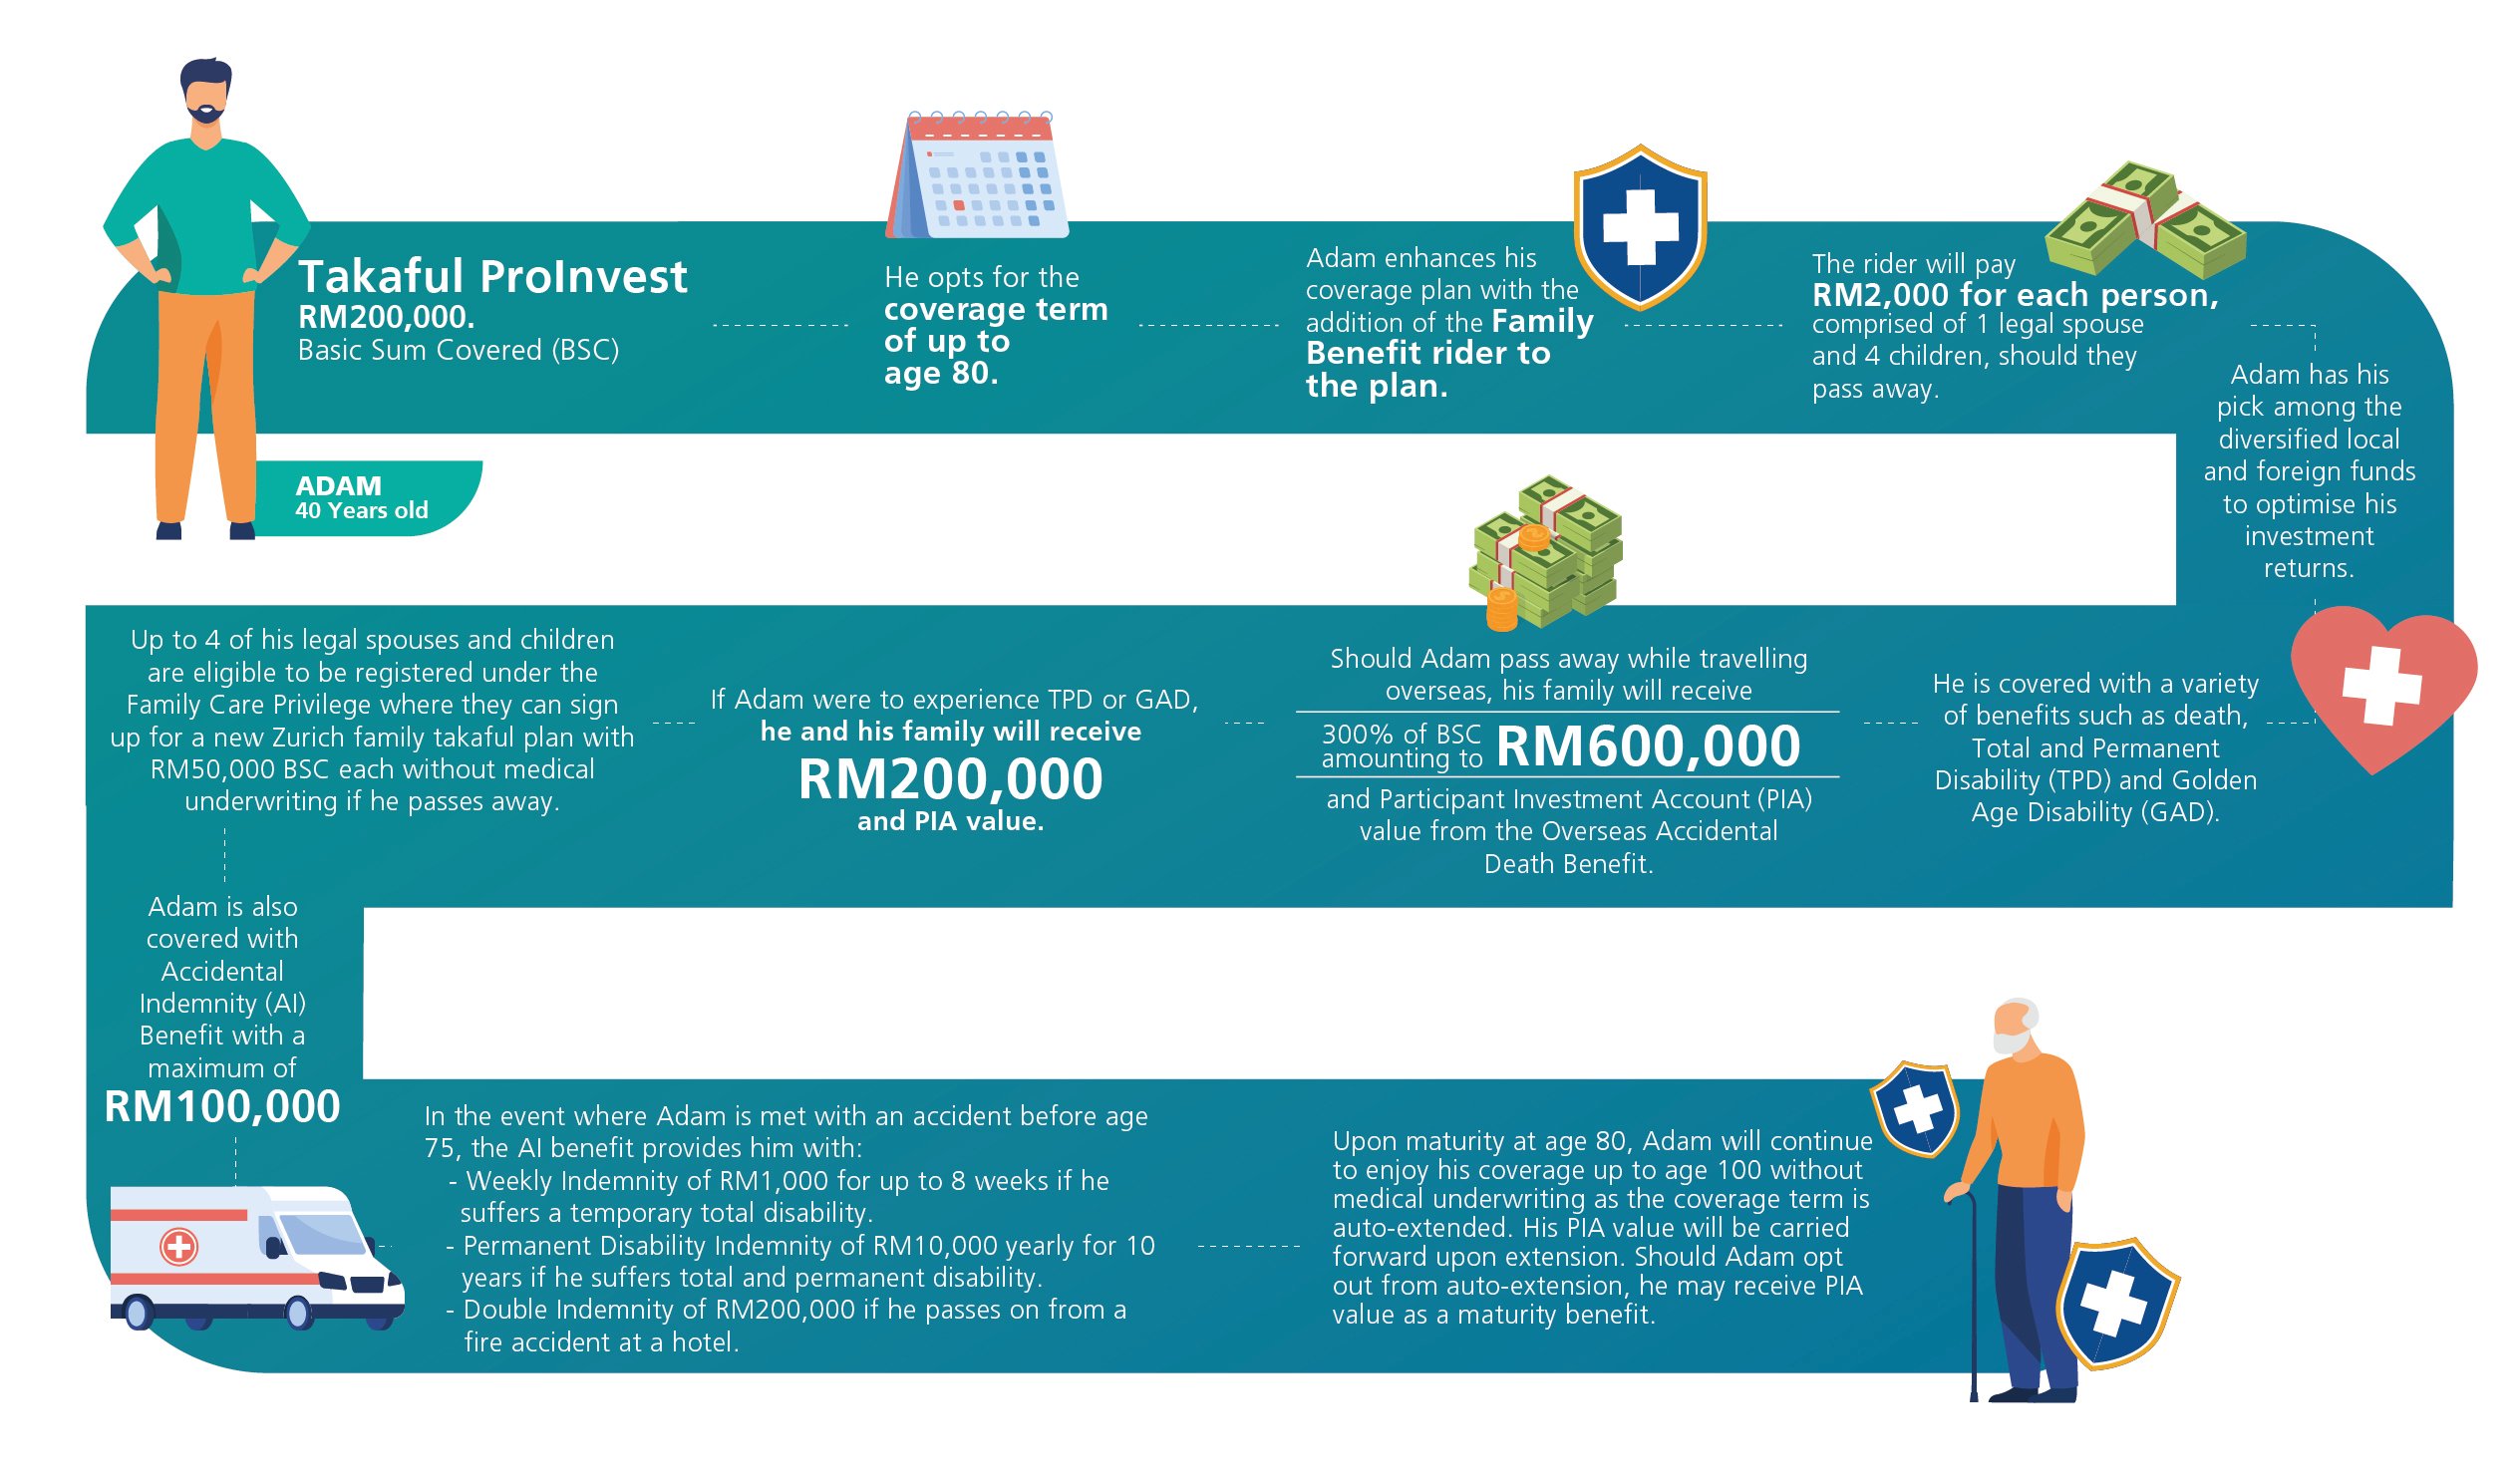 How Does Takaful ProInvest Work?